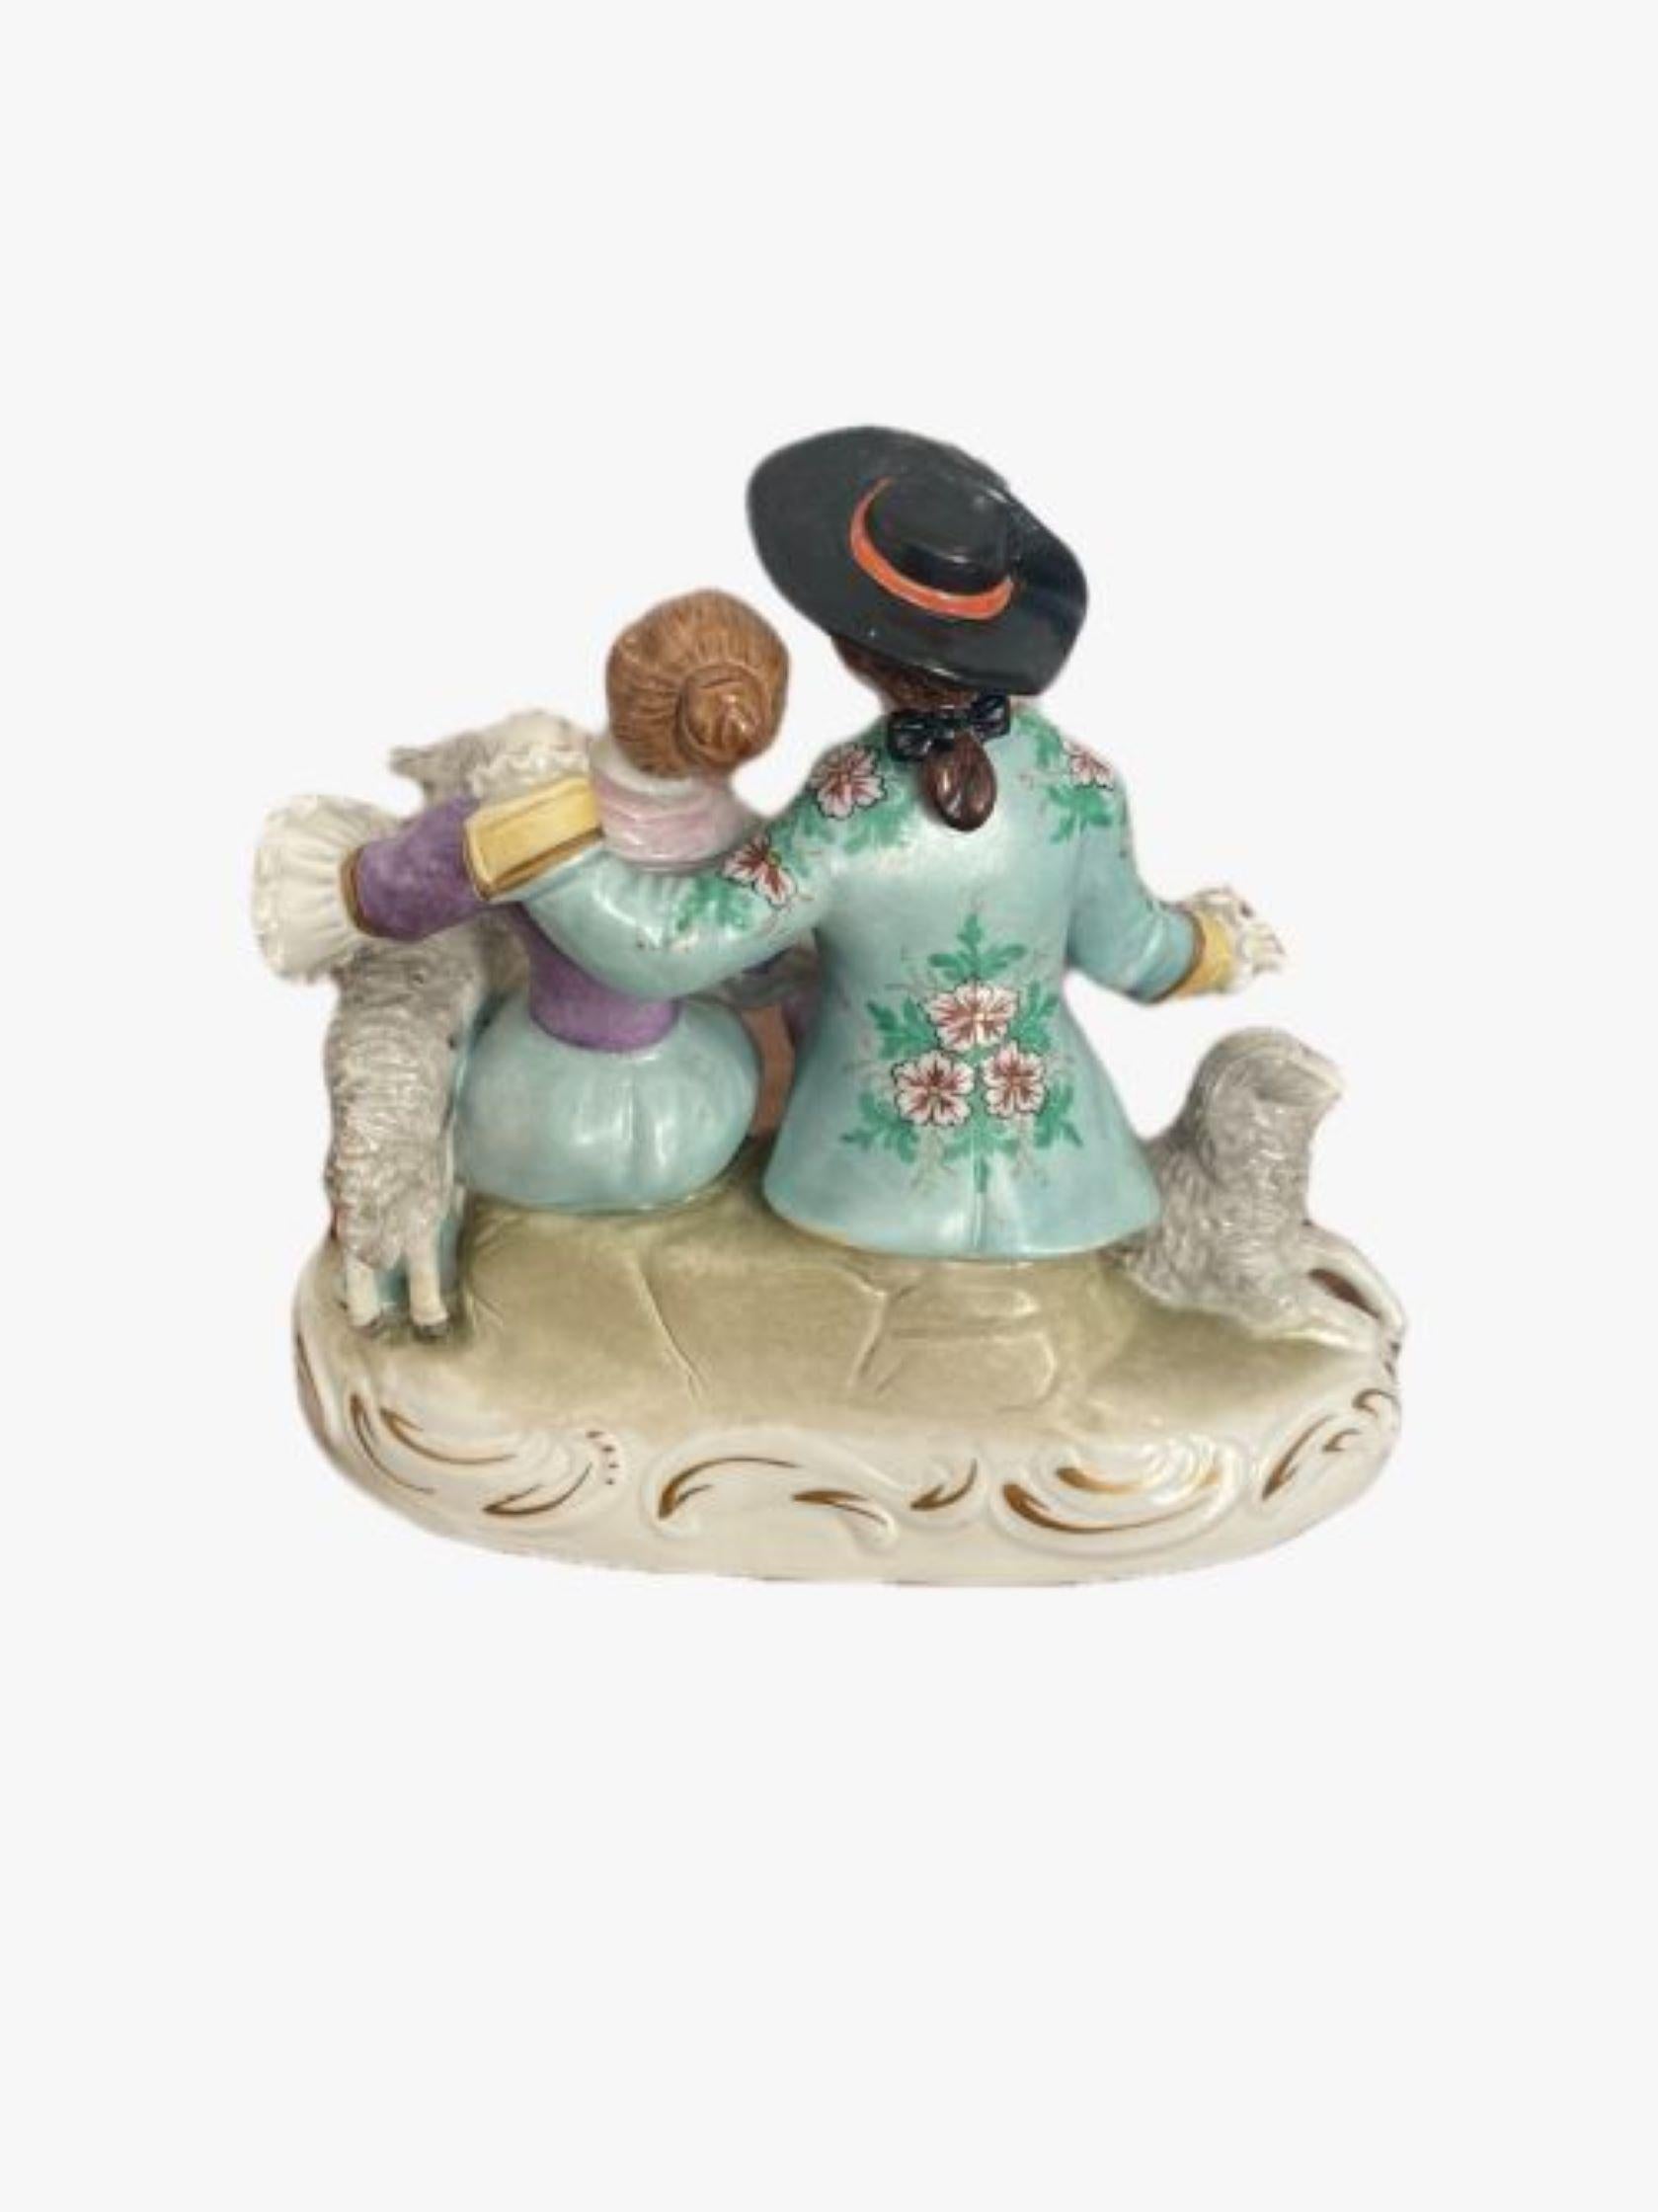 Late 19th Century English Victorian antique porcelain Continental Group having two figures sitting on a shaped base with gilded scroll decoration in colourful period clothing holding two sheep in wonderful hand painted purple, blue, white, black and